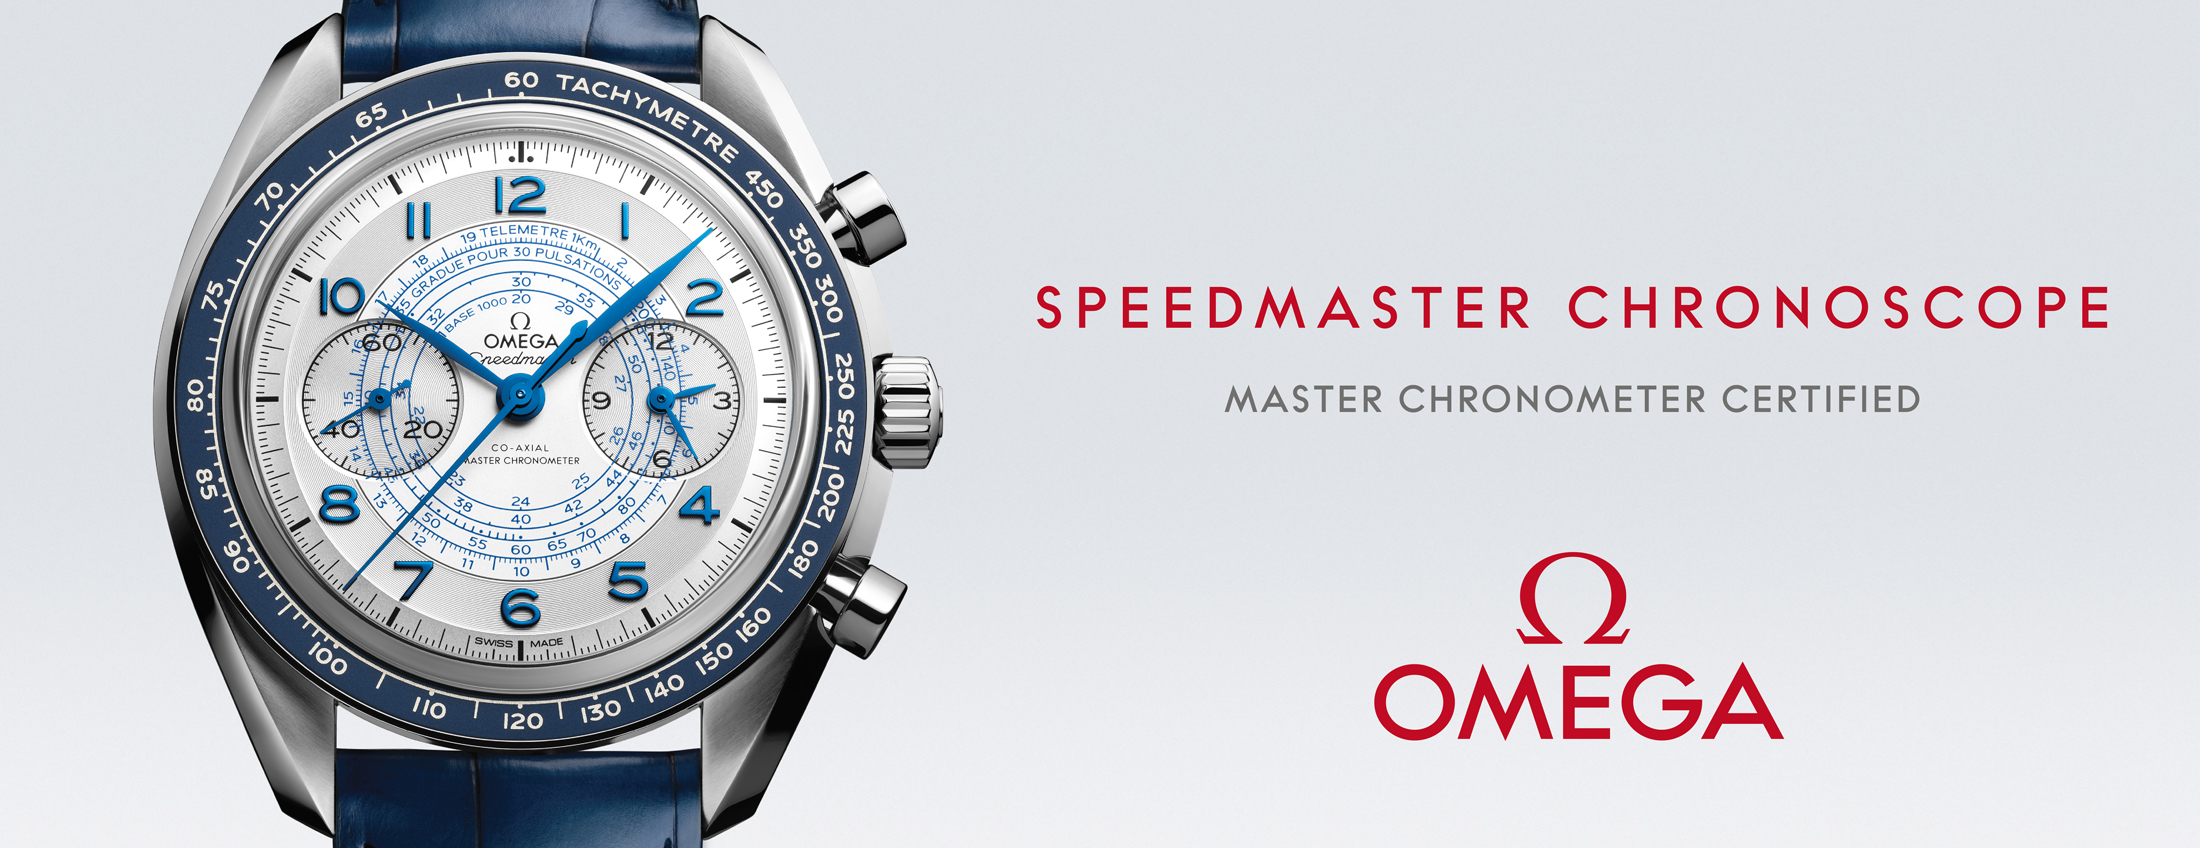 An OMEGA Speedmaster Chronoscope with blue strap and silver dial